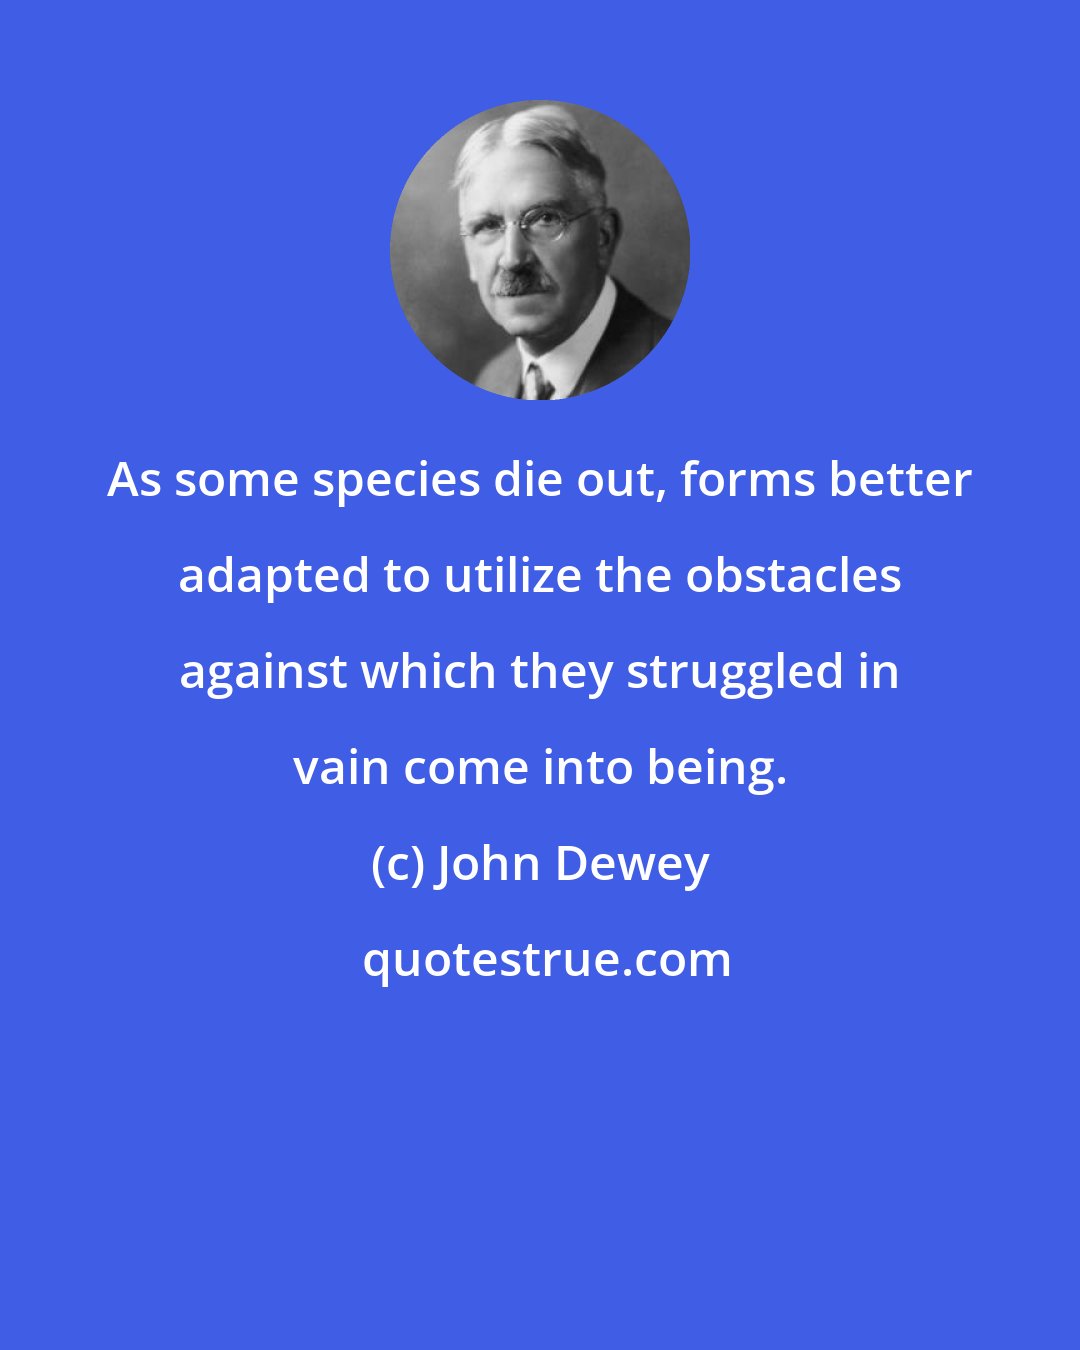 John Dewey: As some species die out, forms better adapted to utilize the obstacles against which they struggled in vain come into being.